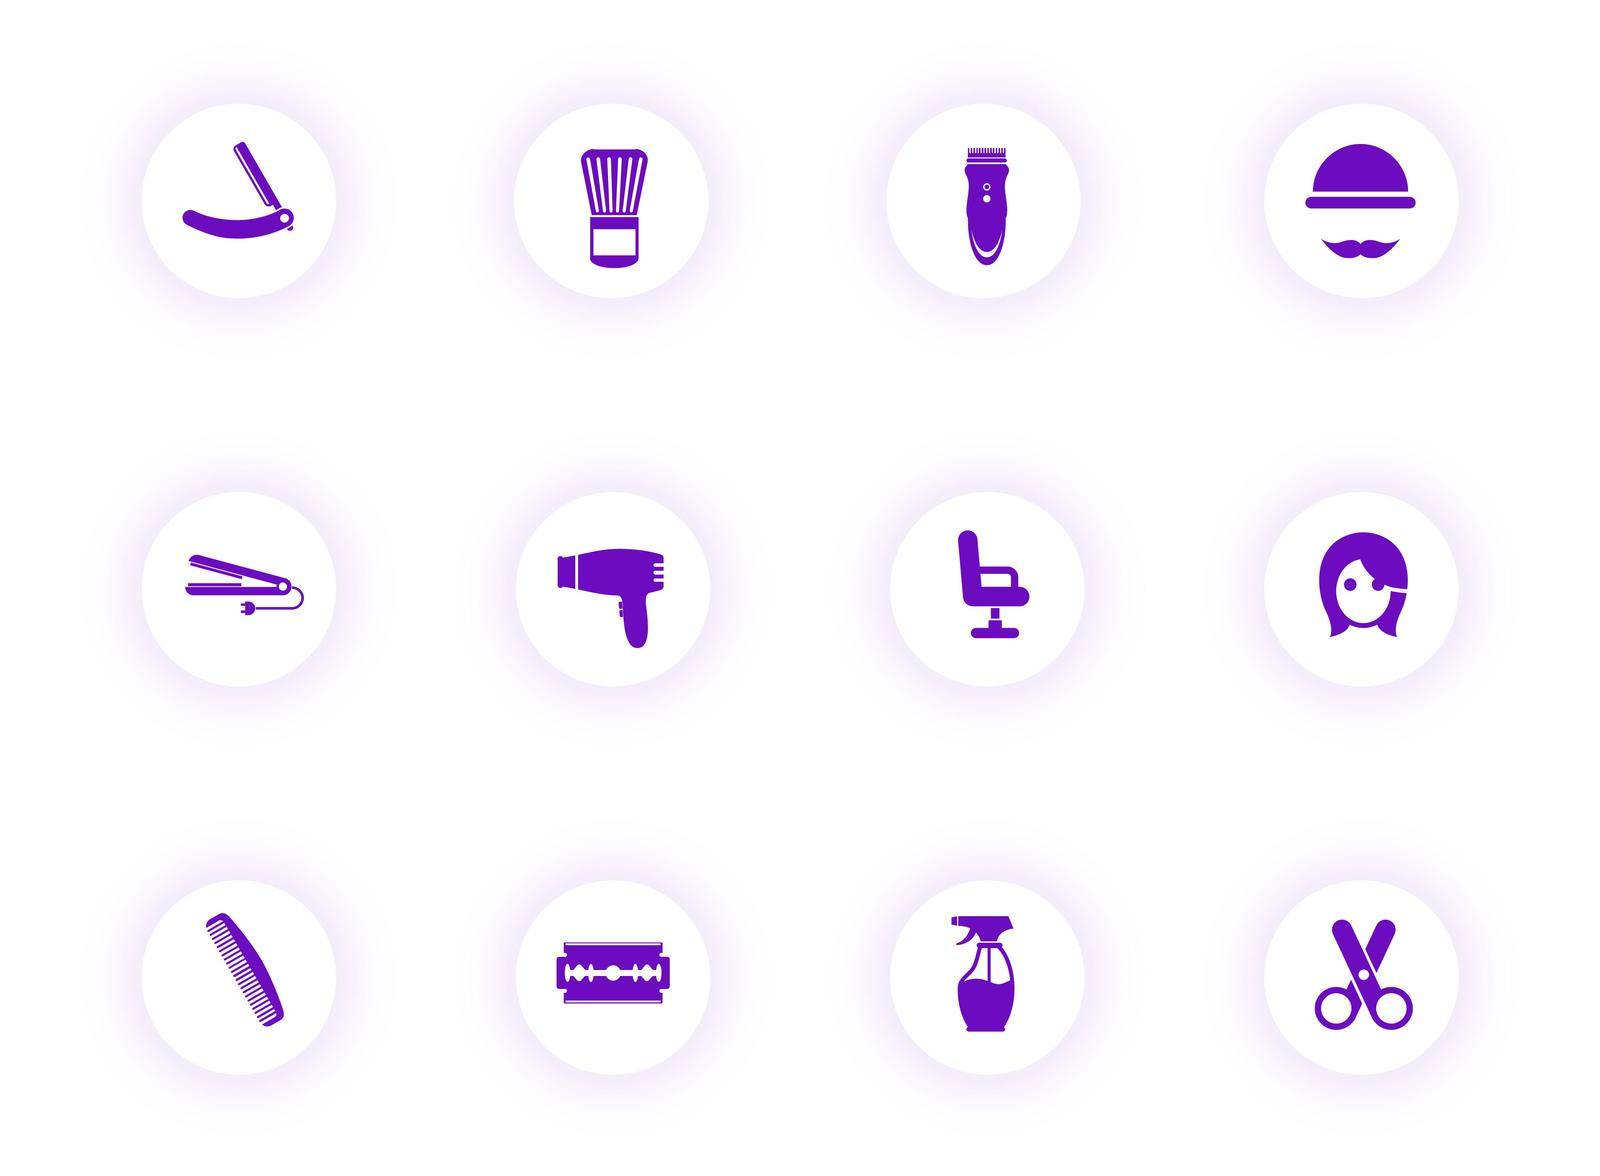 barber shop purple color vector icons on light round buttons with purple shadow. barber shop icon set for web, mobile apps, ui design and print